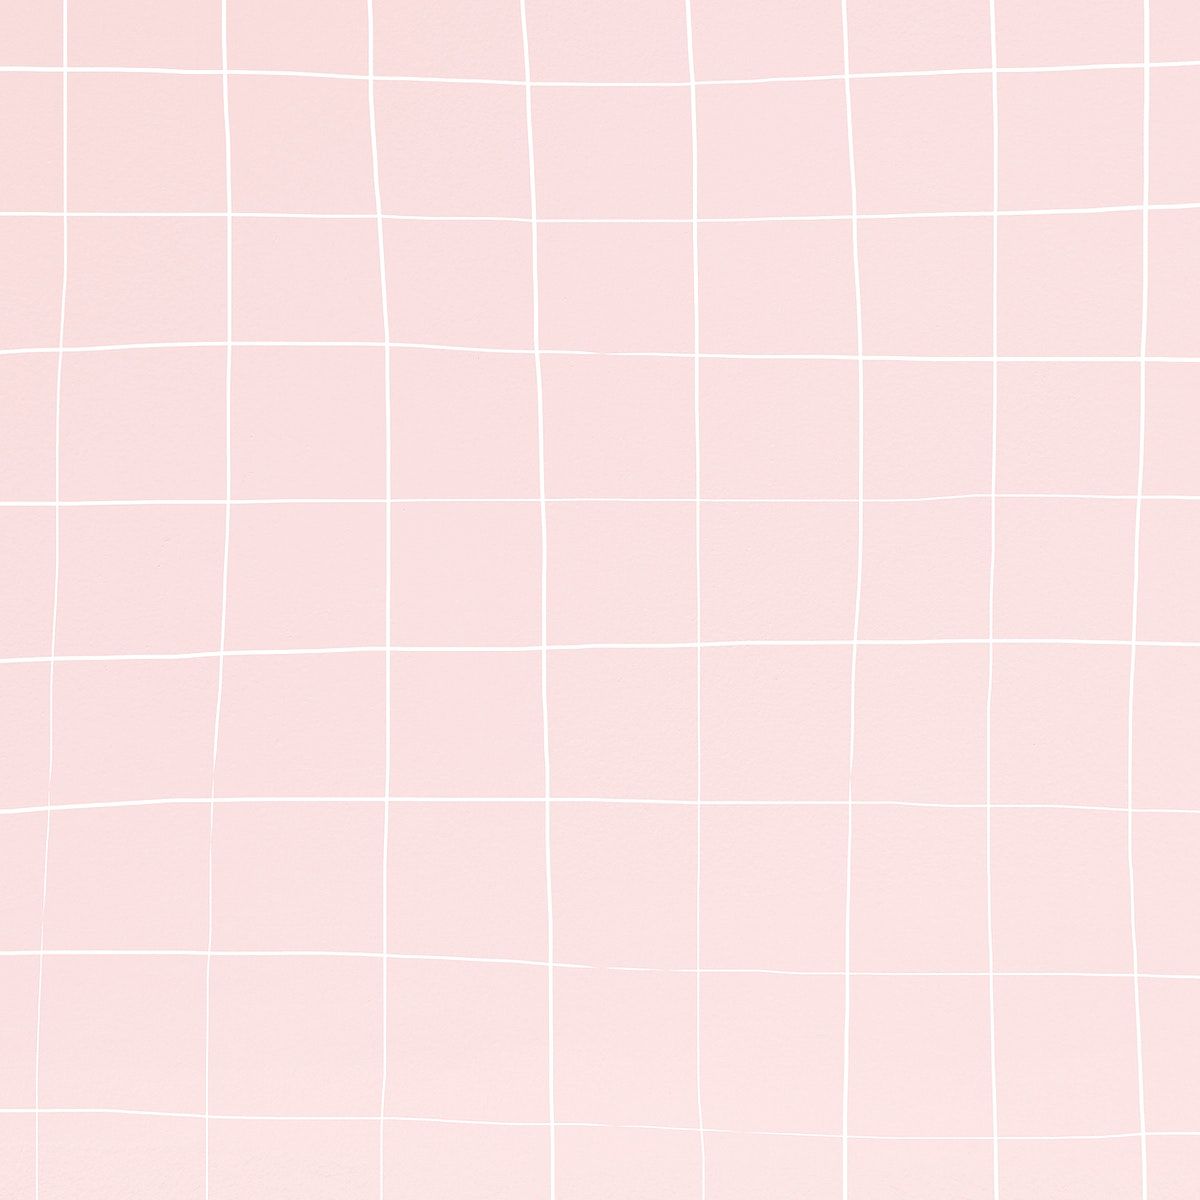 Pink Grid Wallpapers